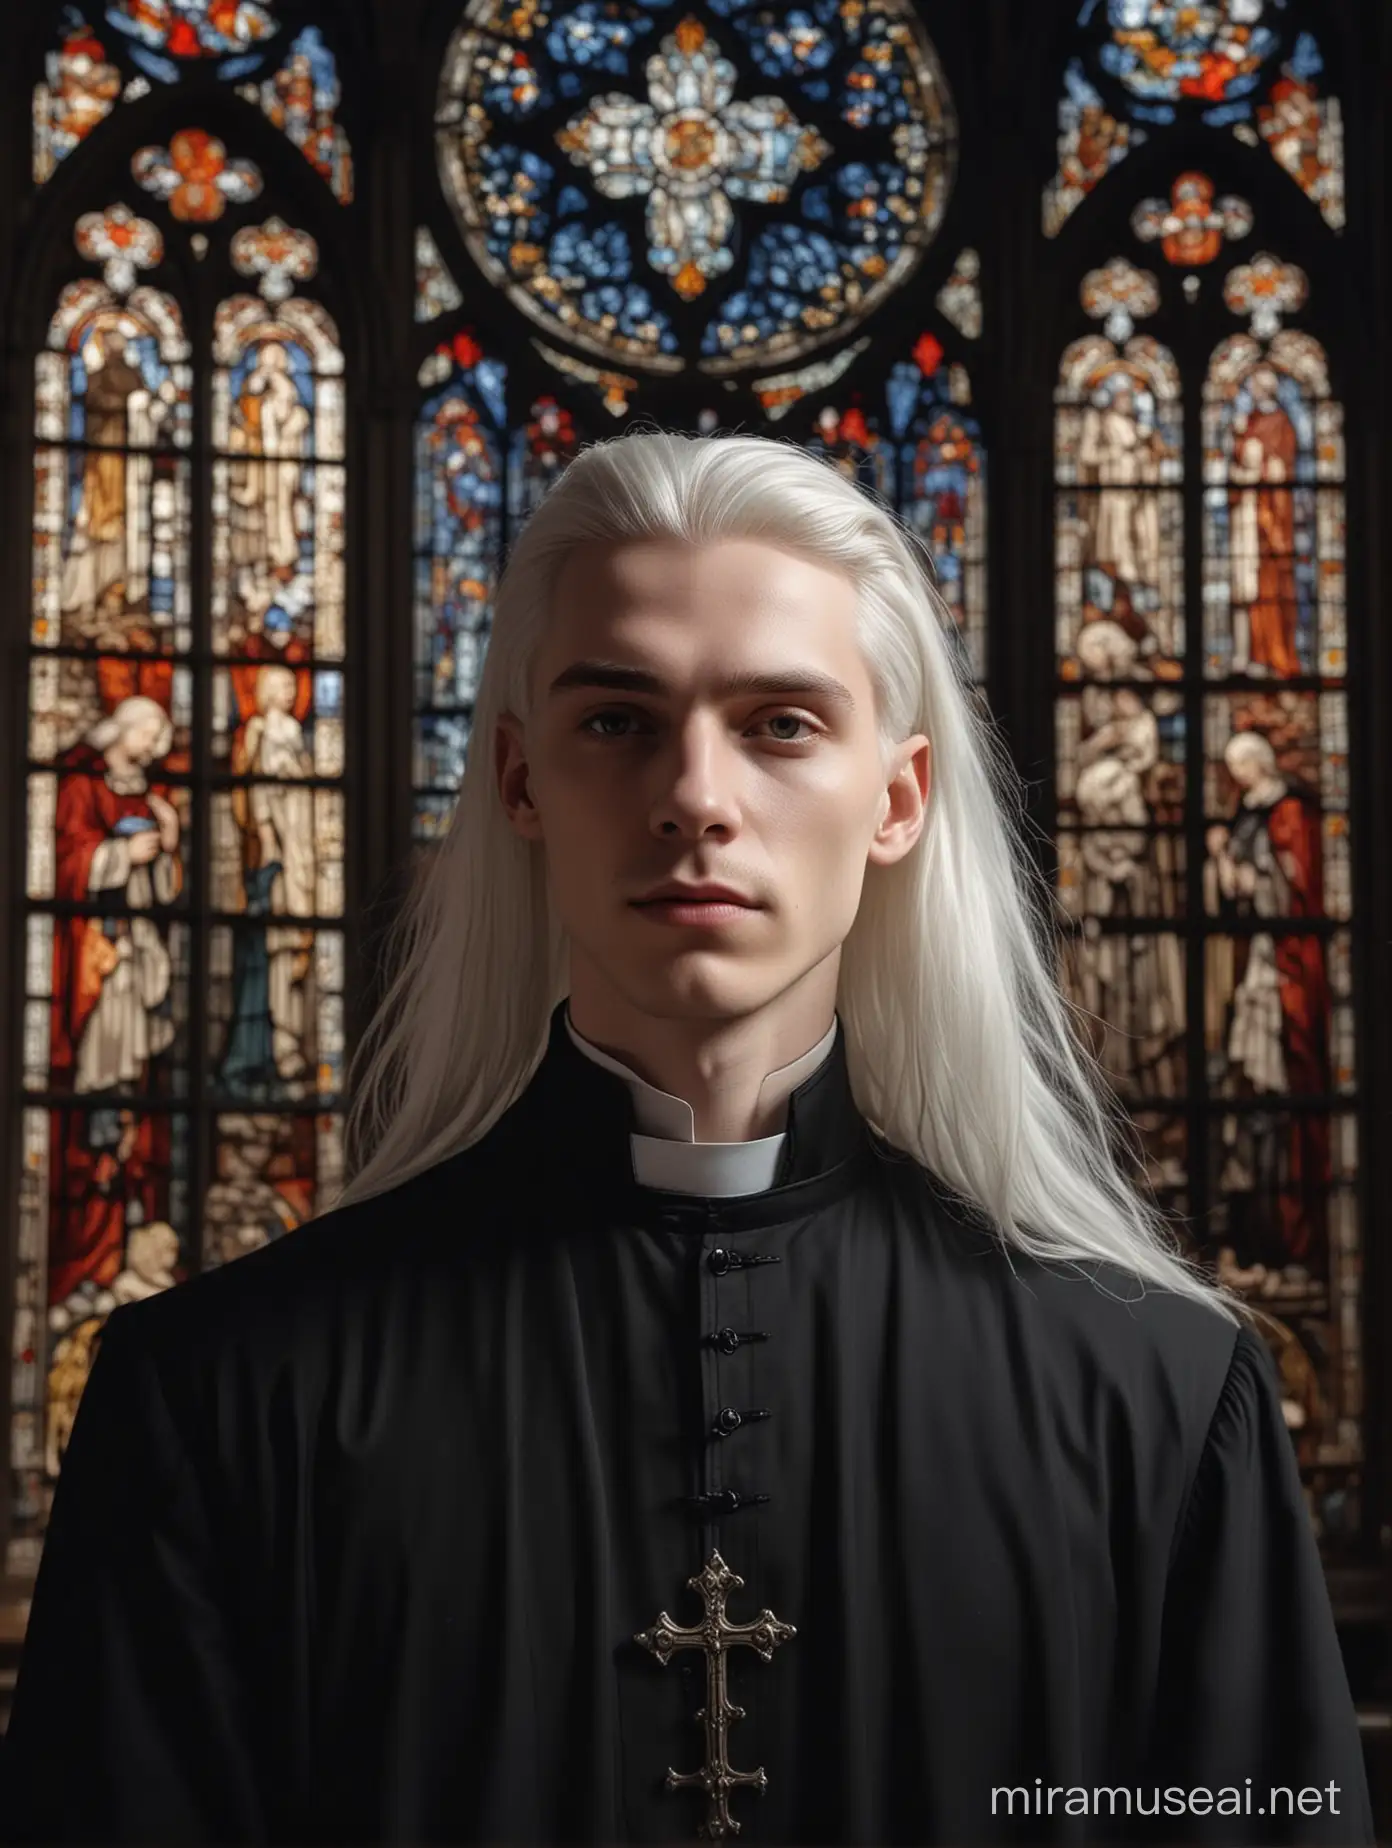 Paleskinned Priest in Gothic Chamber Romantic Fantasy Portrait